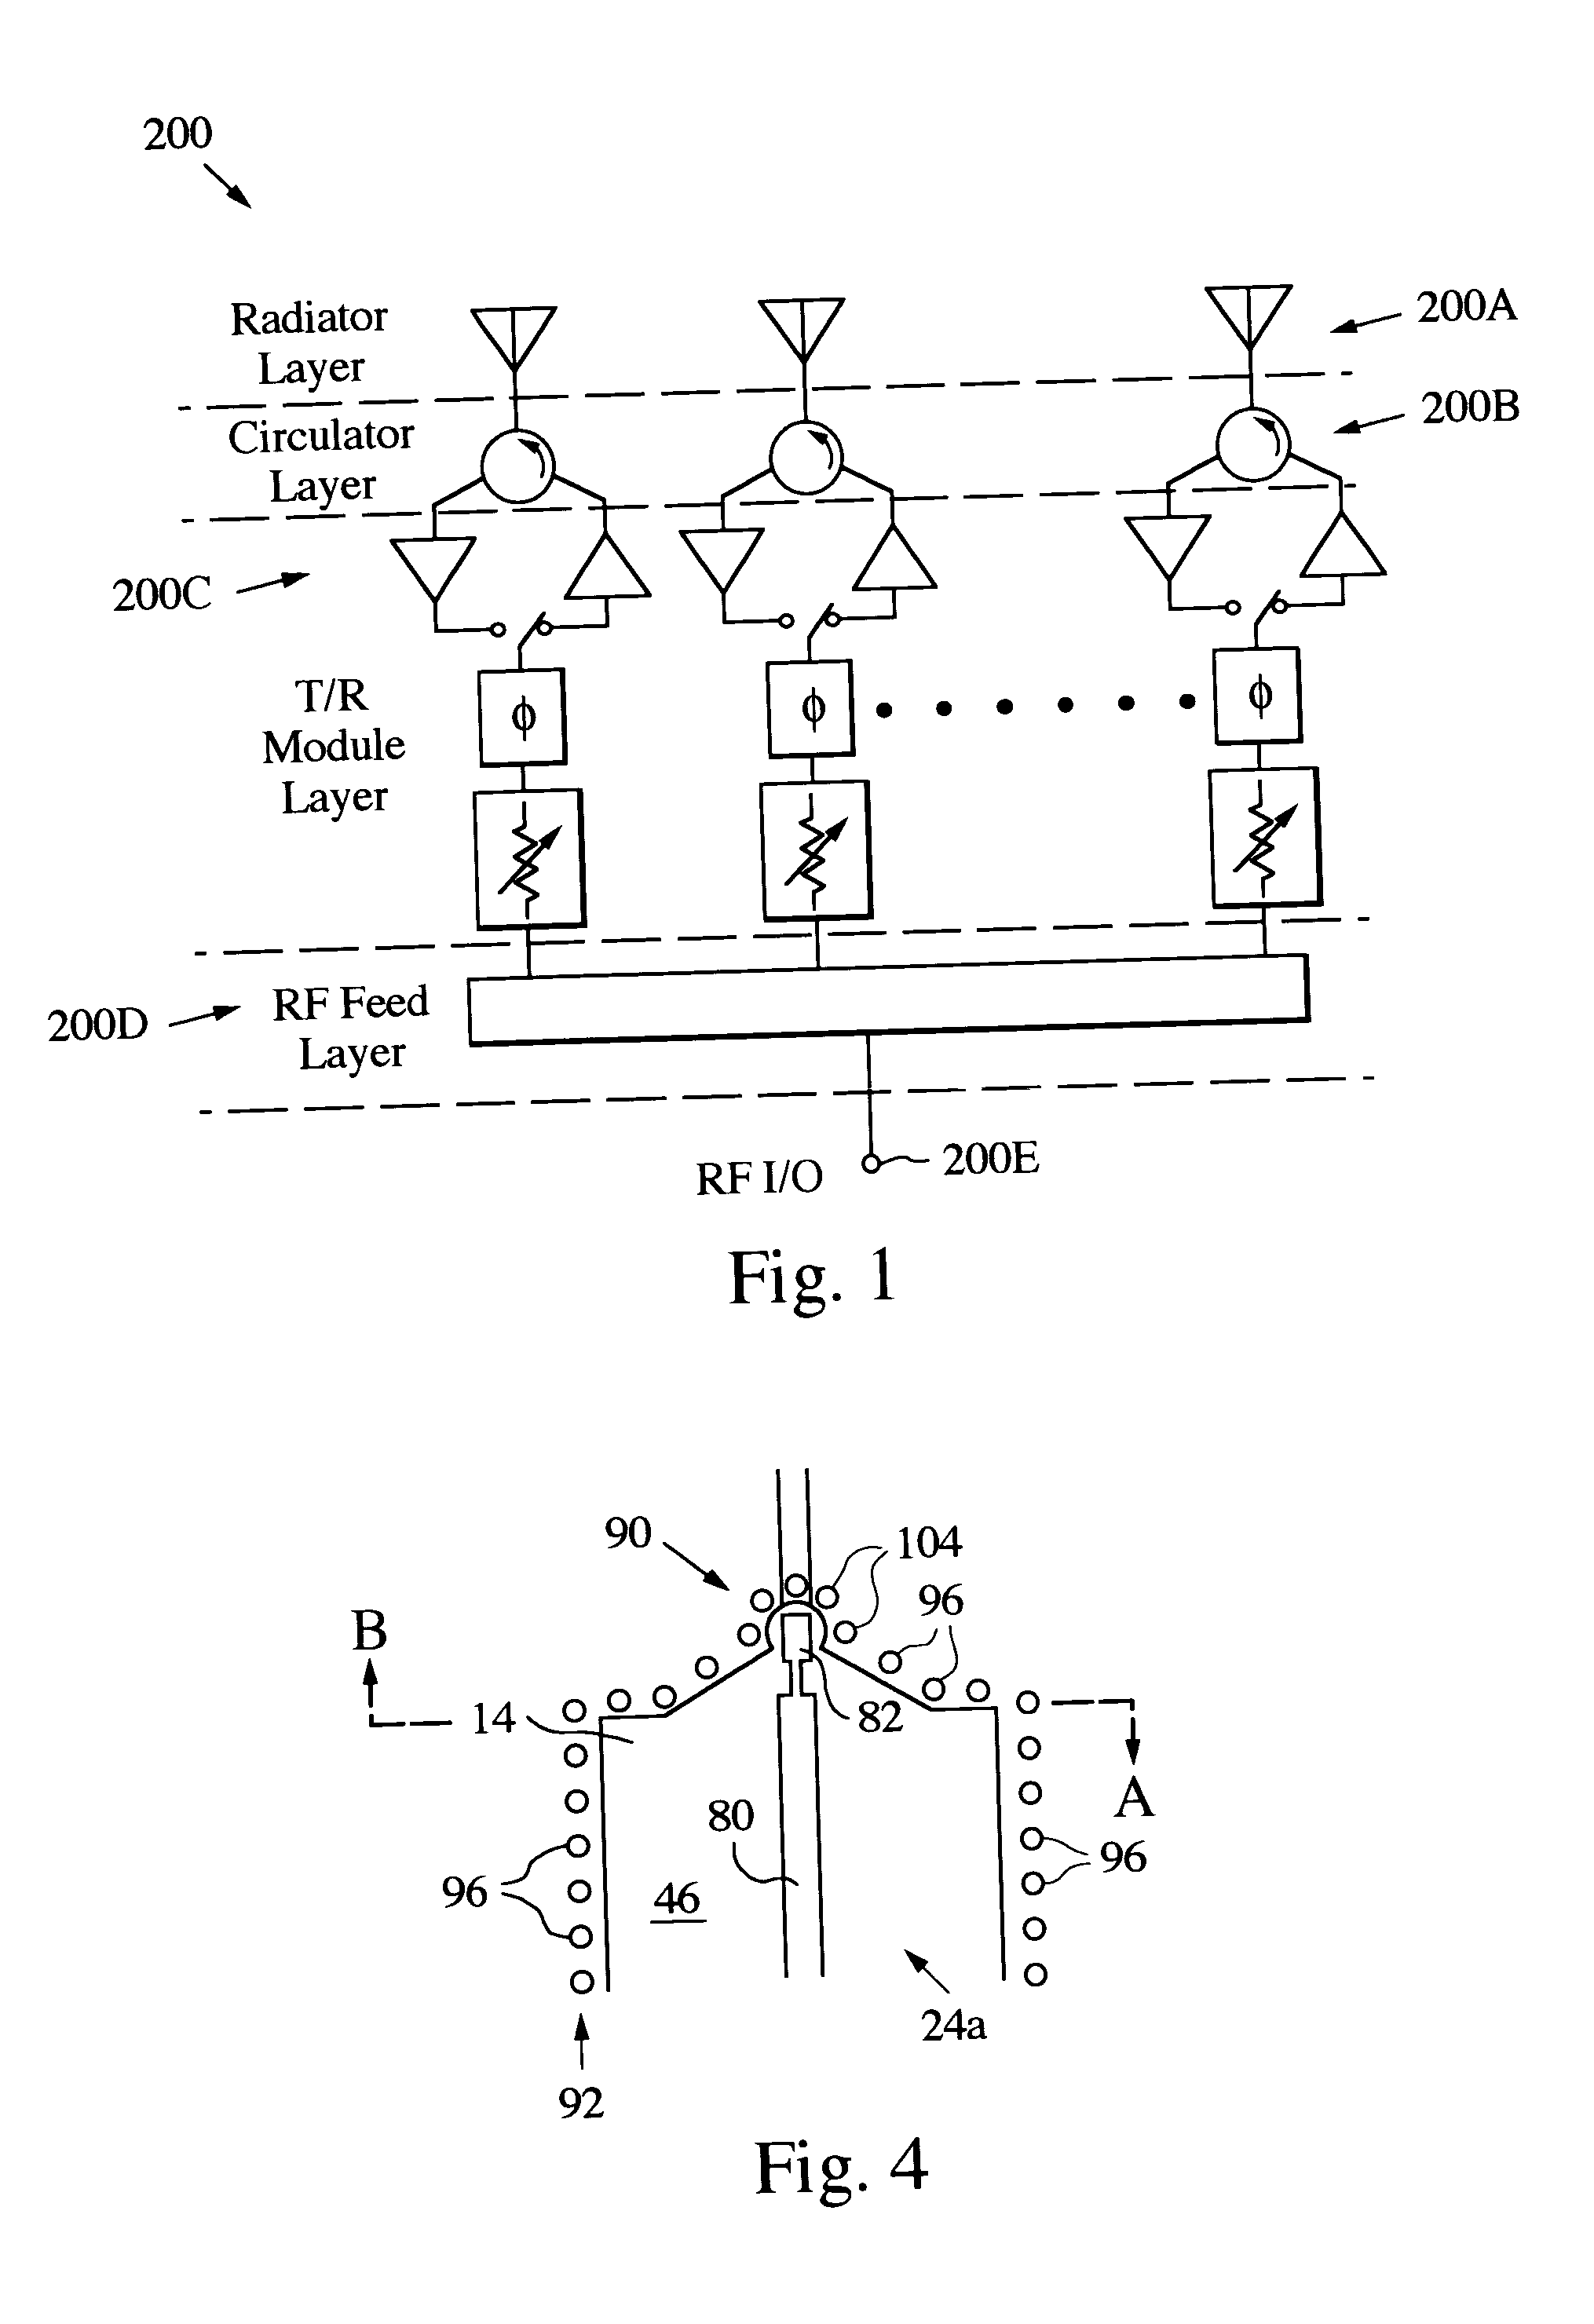 Embedded RF vertical interconnect for flexible conformal antenna